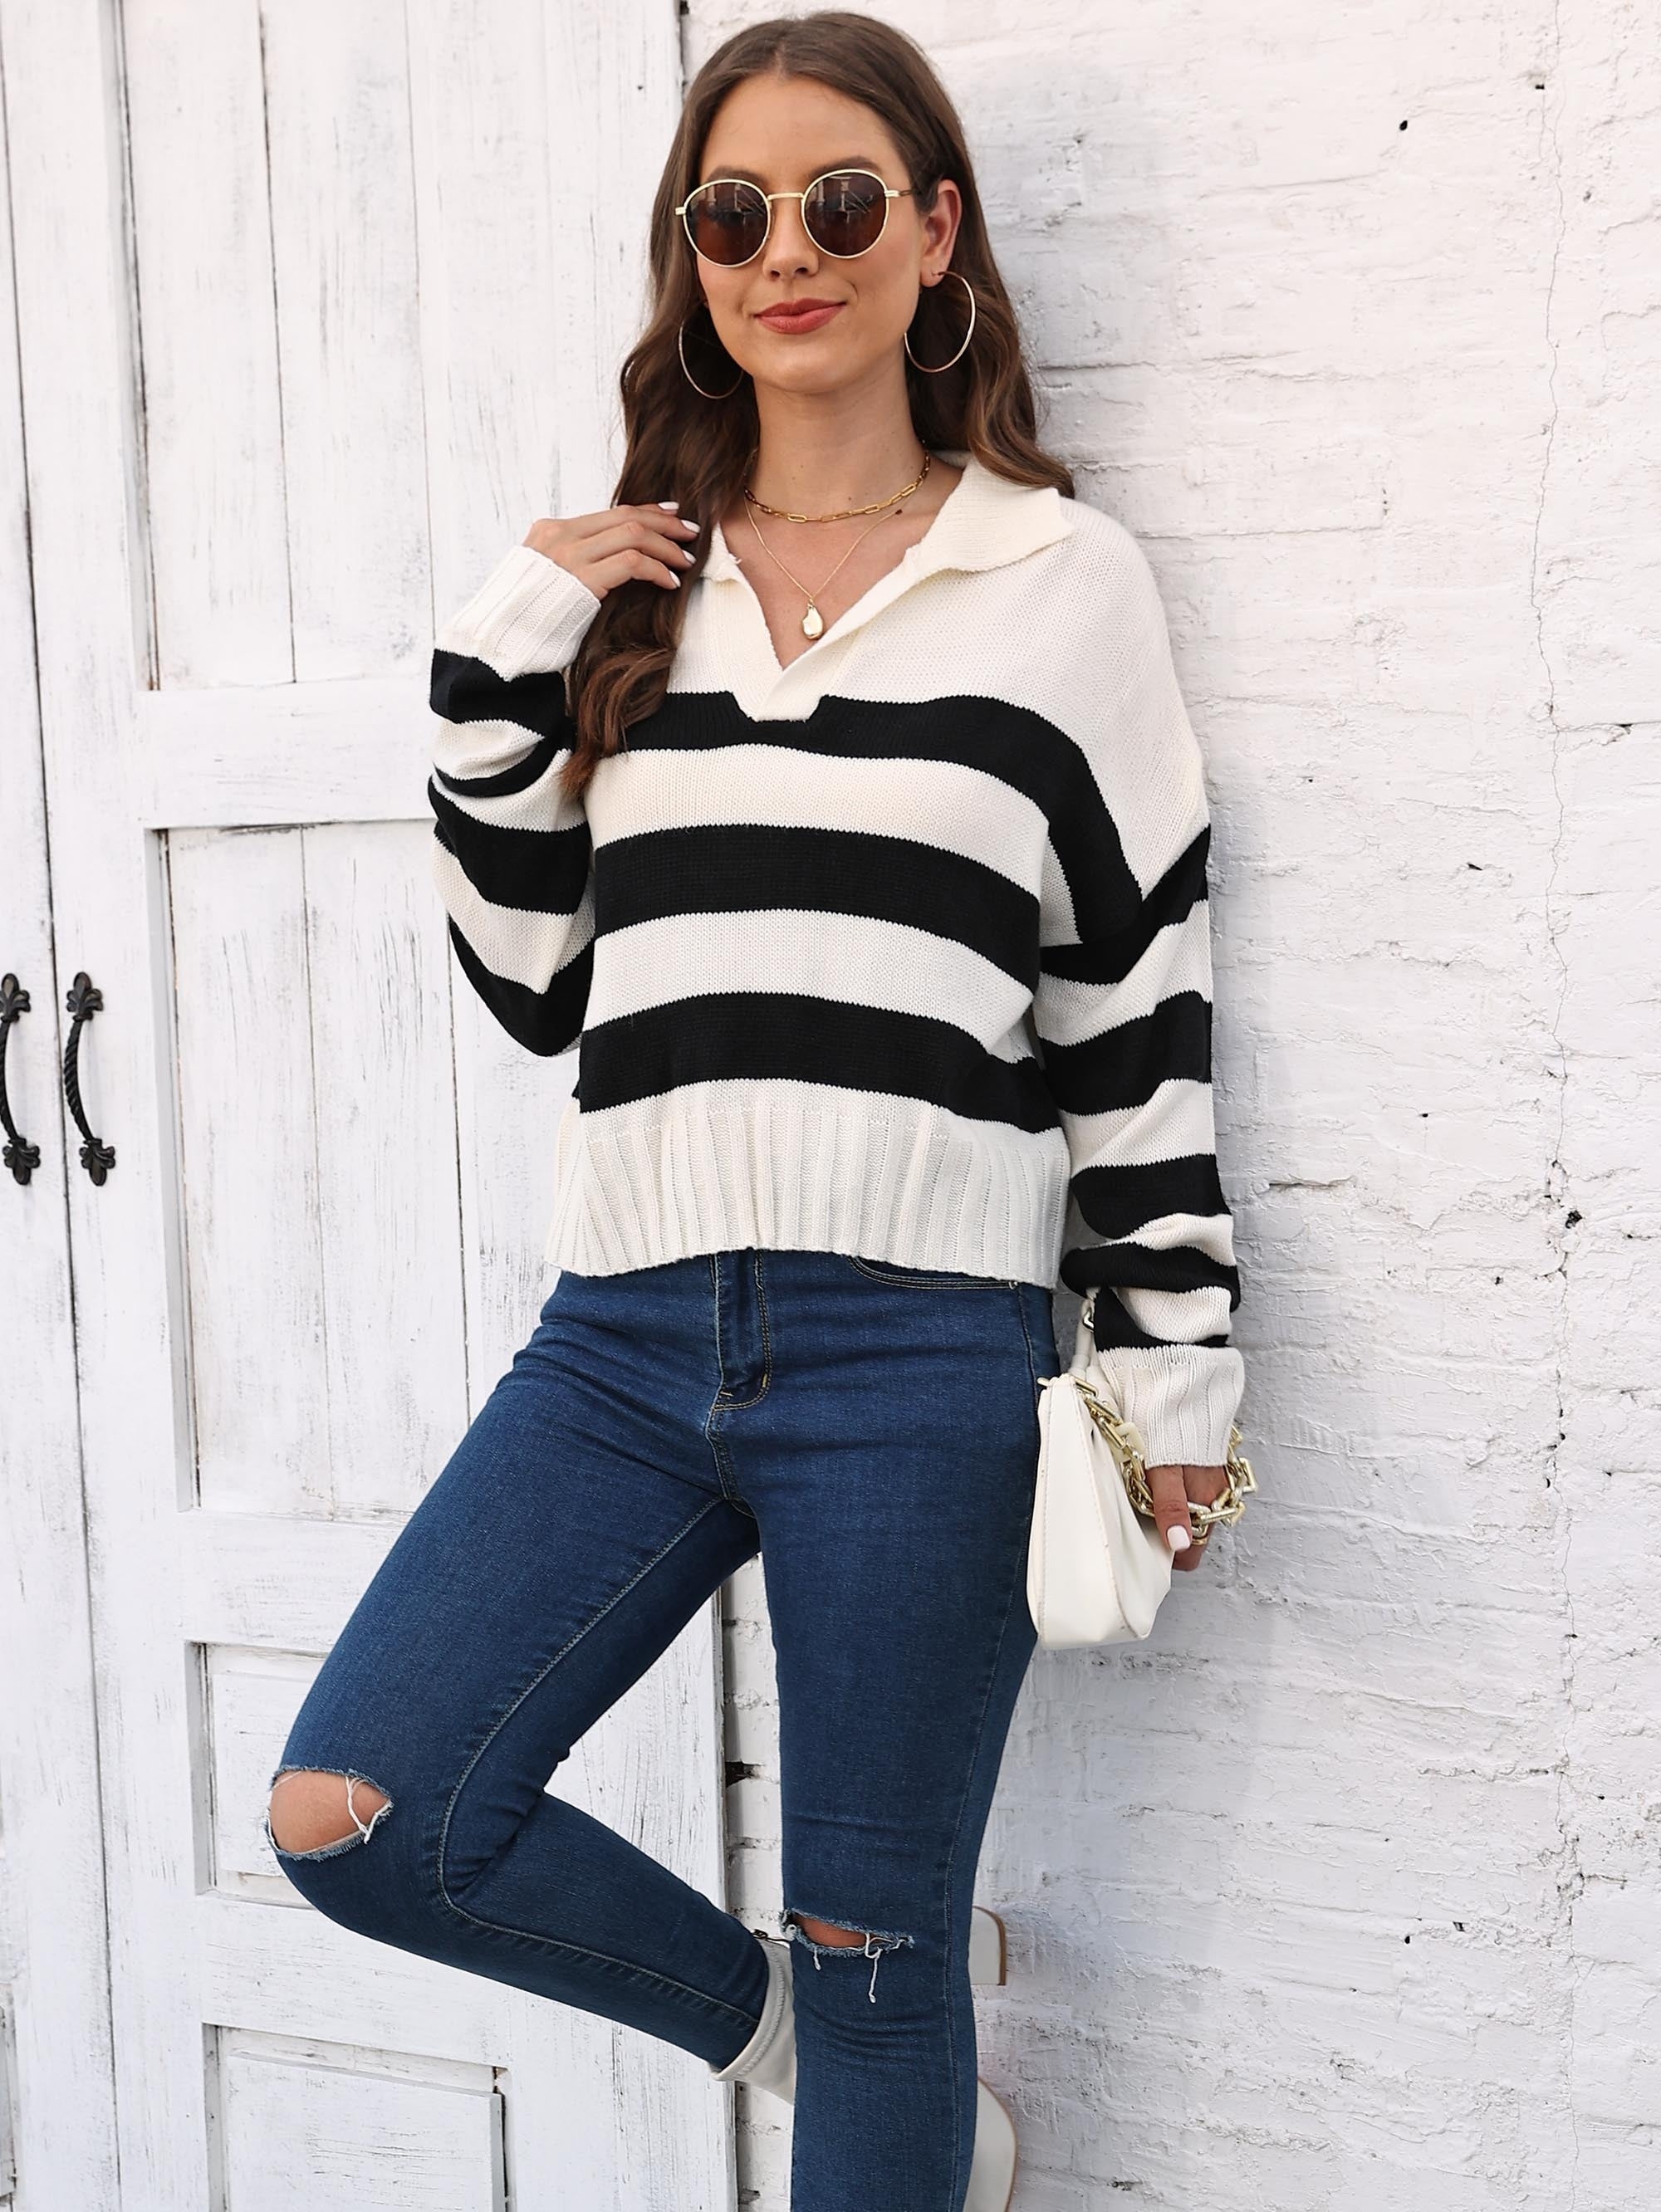 vlovelaw  Striped V Neck Pullover Sweater, Casual Long Sleeve Drop Shoulder Sweater, Women's Clothing